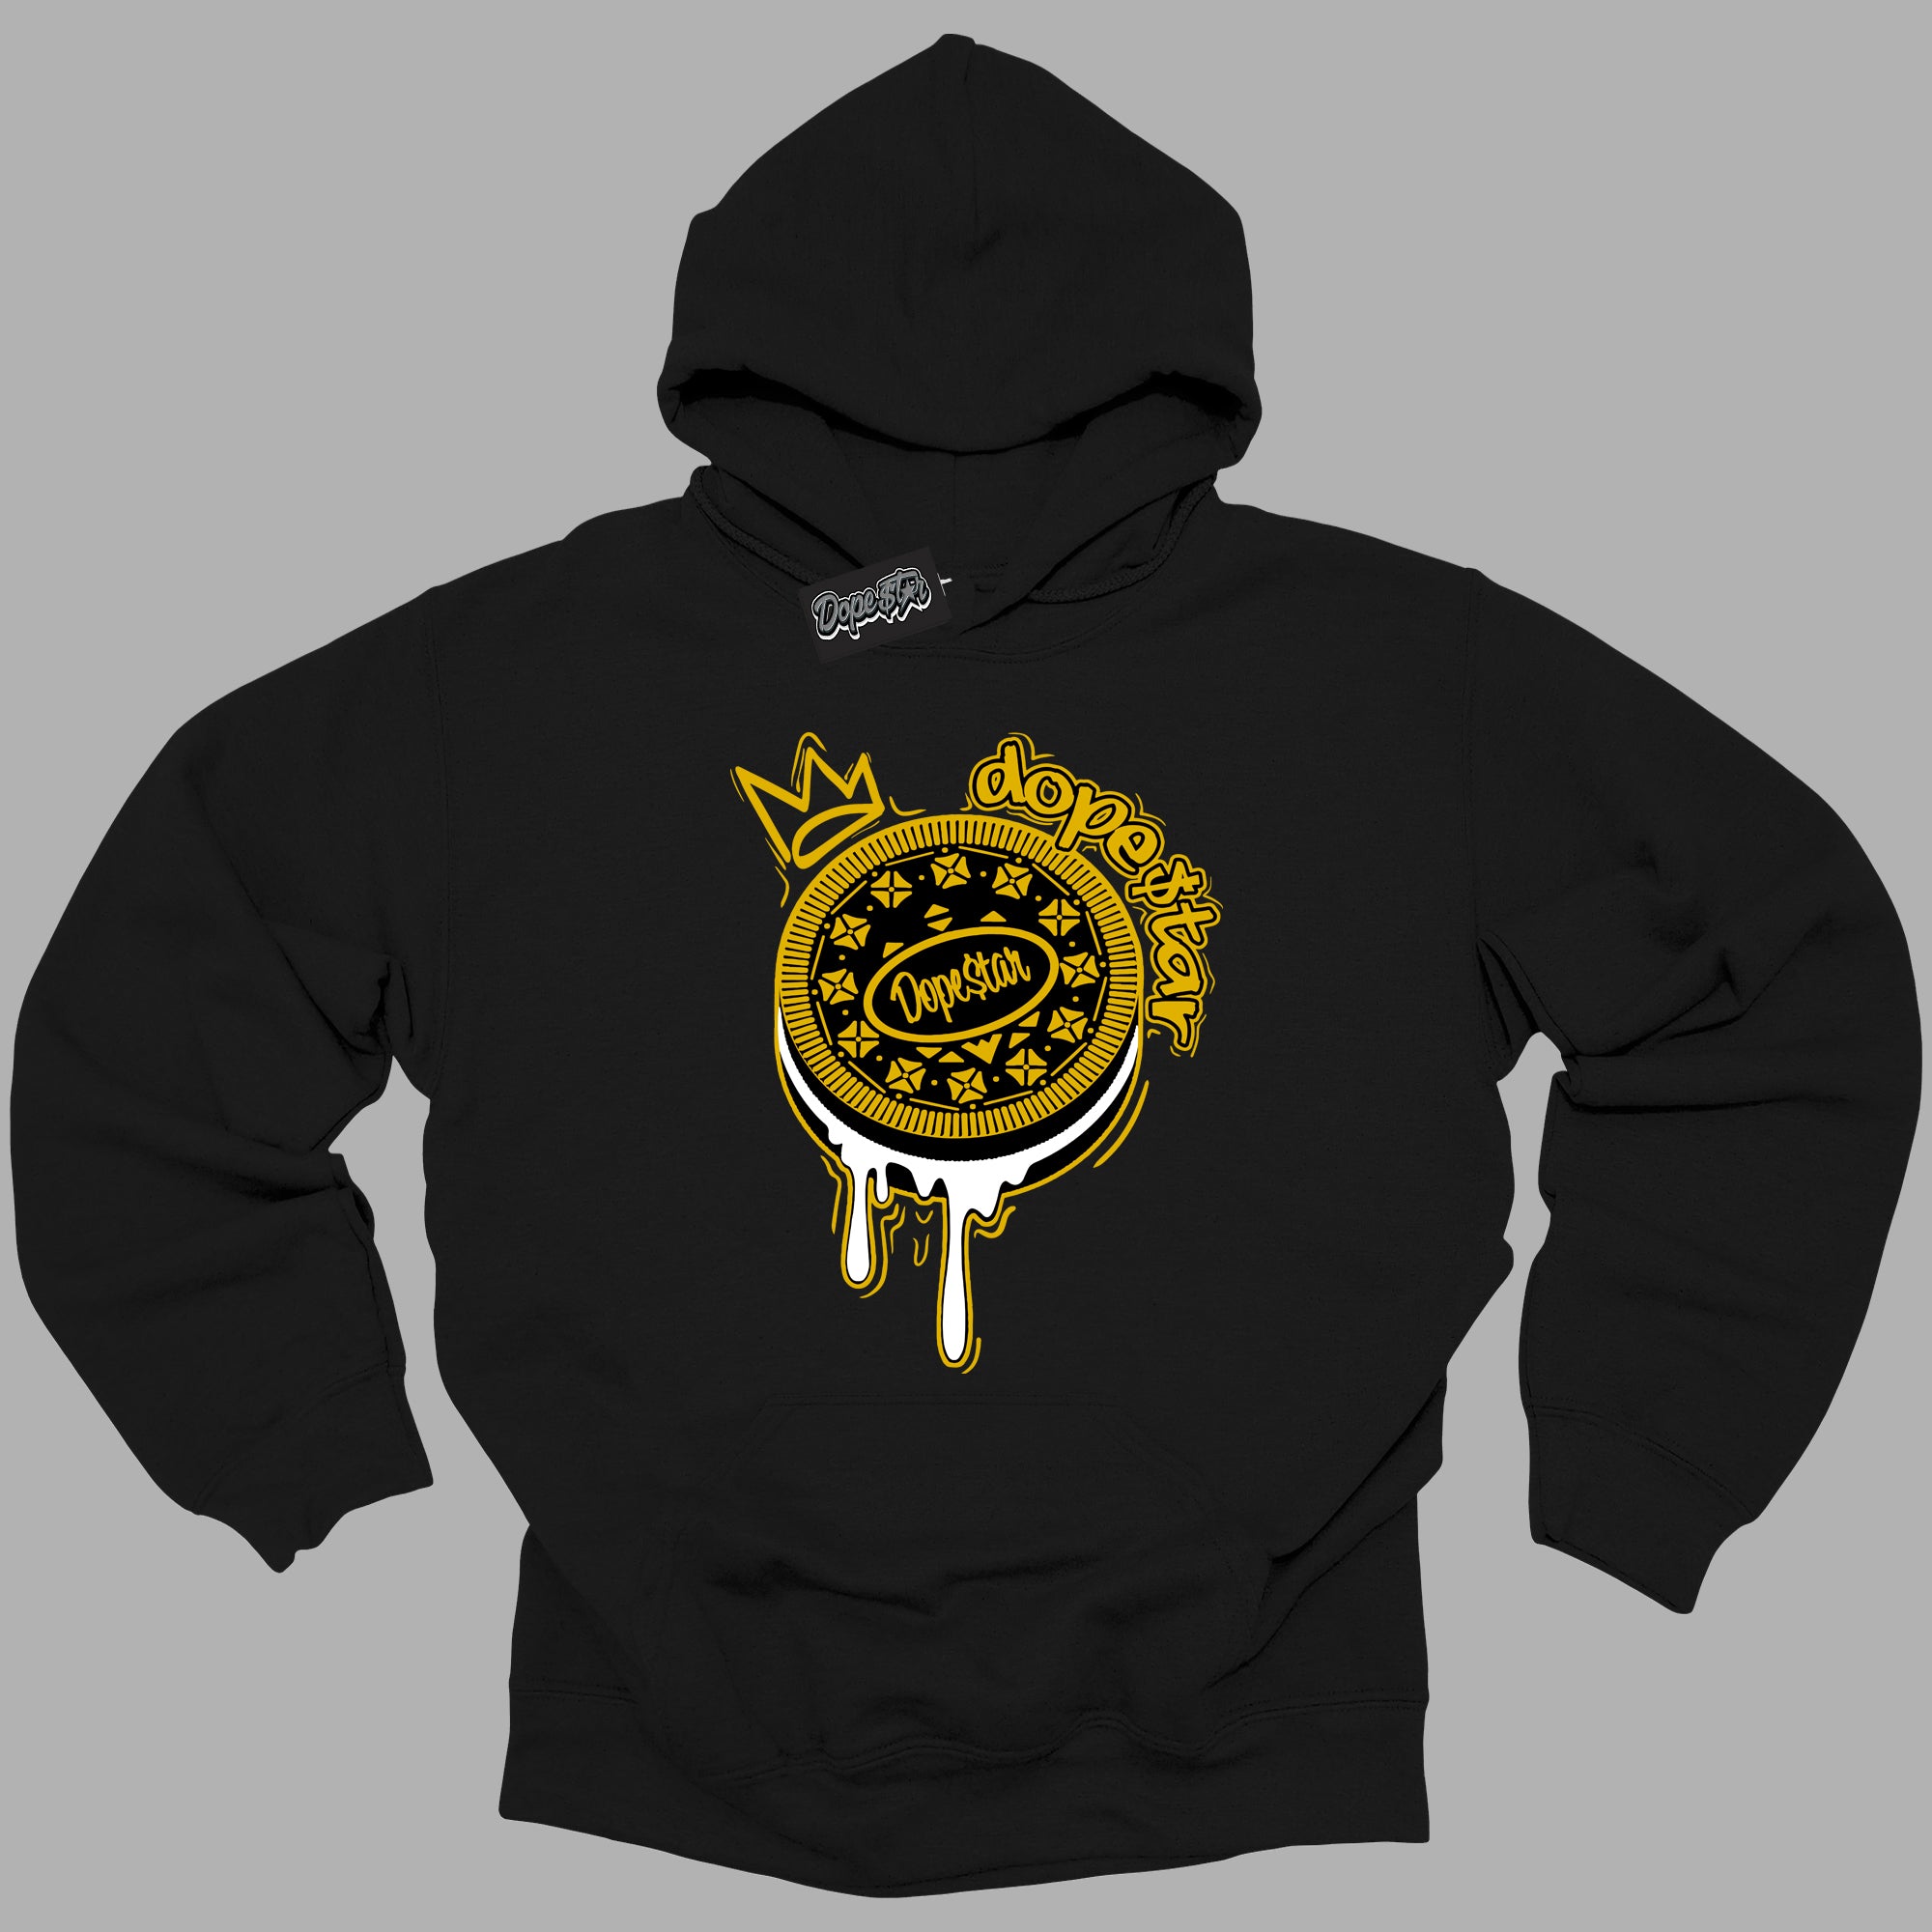 Cool Black Hoodie with “ Oreo DS ”  design that Perfectly Matches Yellow Ochre 6s Sneakers.